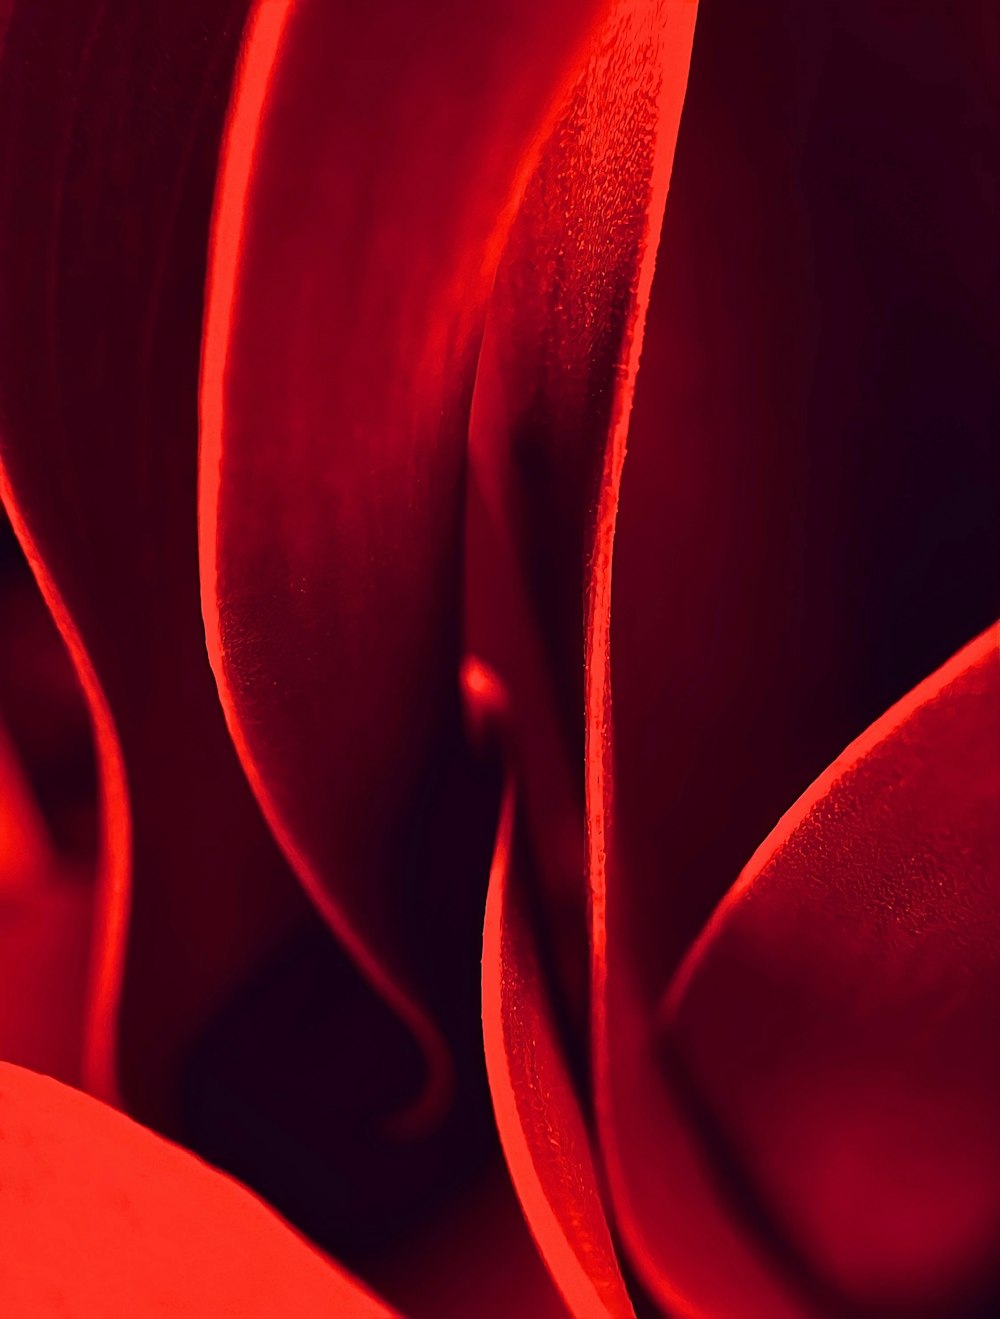 a close up view of a red flower